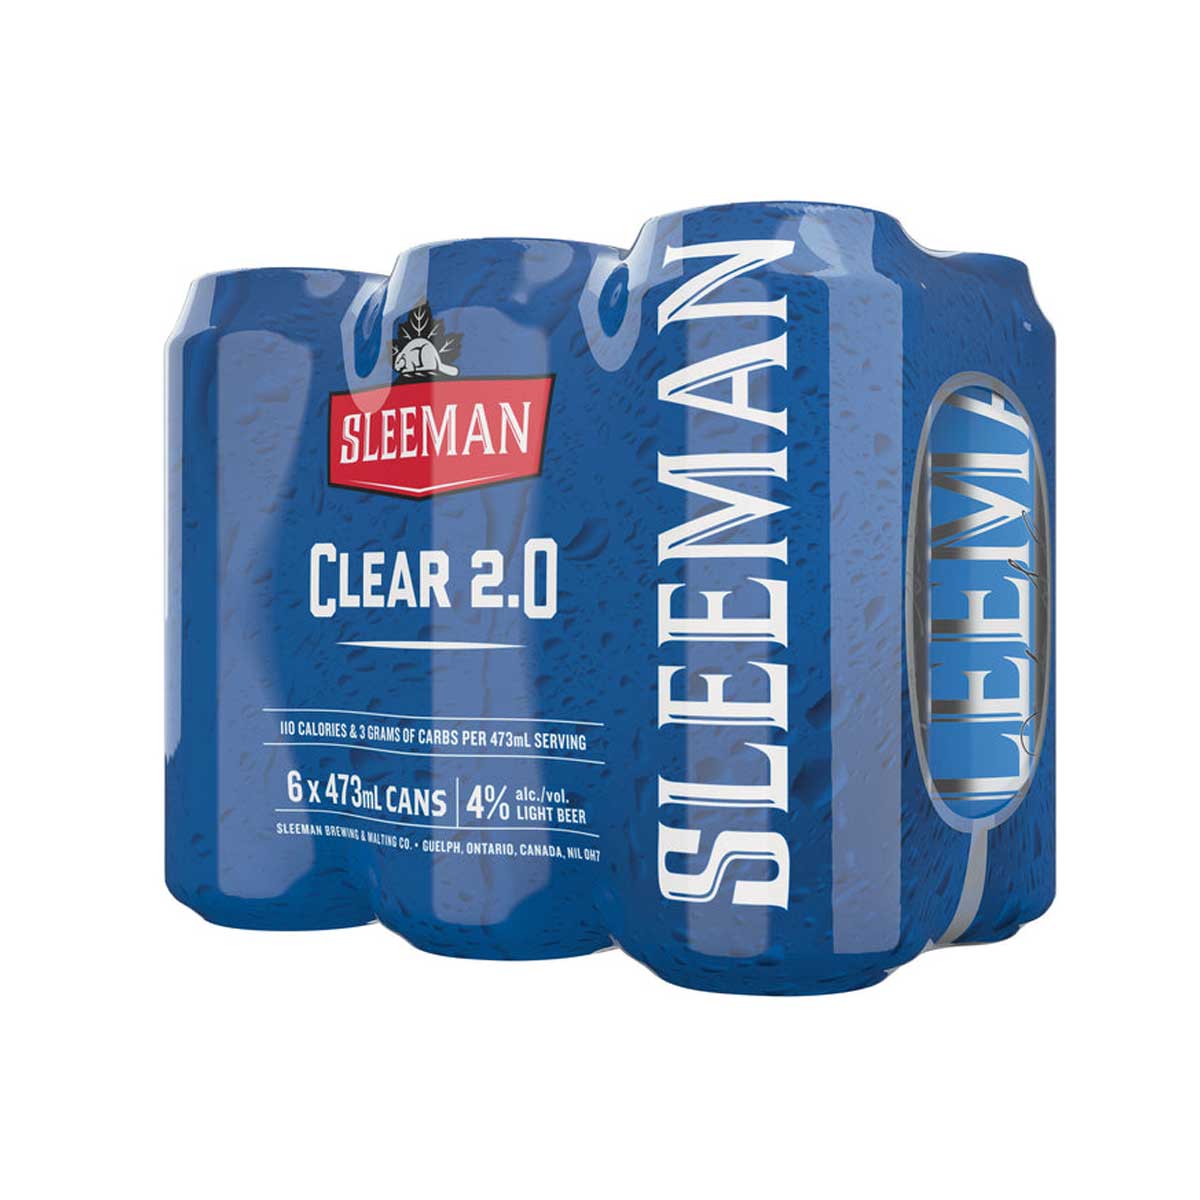 TAG Liquor Stores BC-SLEEMAN CLEAR 2.0 6 CANS